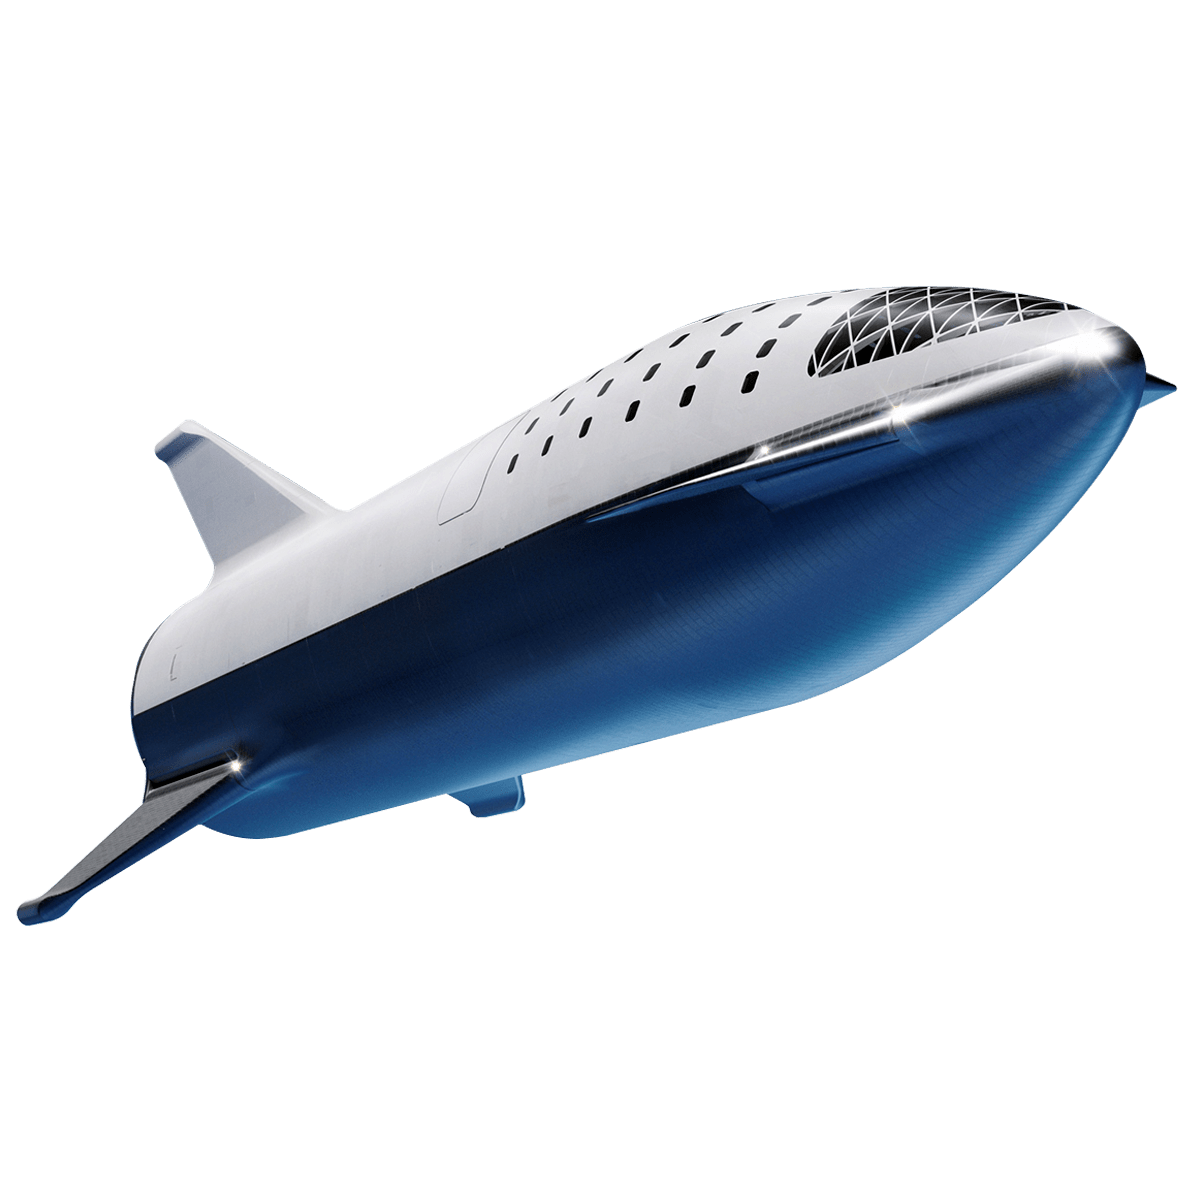 starship hopper png transparent background free, starship hopper png transparent background download, spaceship png transparent, realistic spaceship png, spaceship pixel png, 2d spaceship png, cartoon spaceship png, futuristic spaceship png, spaceship png transparent, realistic spaceship png, spaceship pixel png, 2d spaceship png, cartoon spaceship png, futuristic spaceship png, spaceship png hd, cartoon spaceship transparent background,